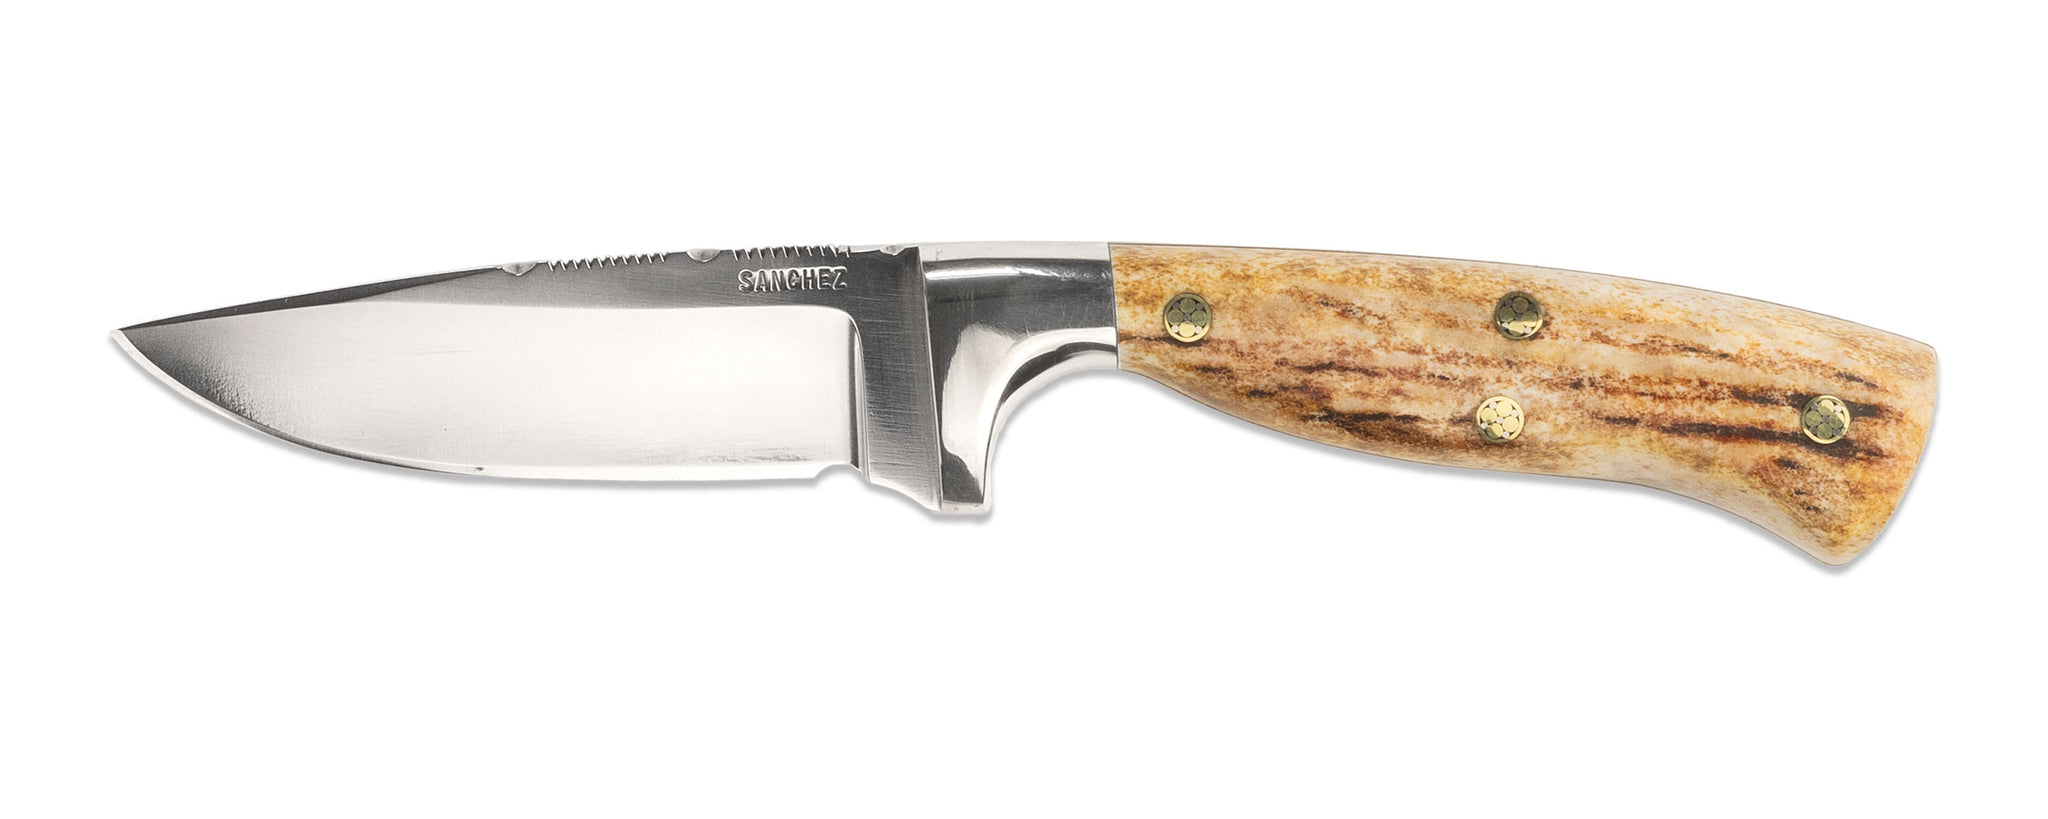 Handcrafted Pocket Knives, Hunting Knives & More